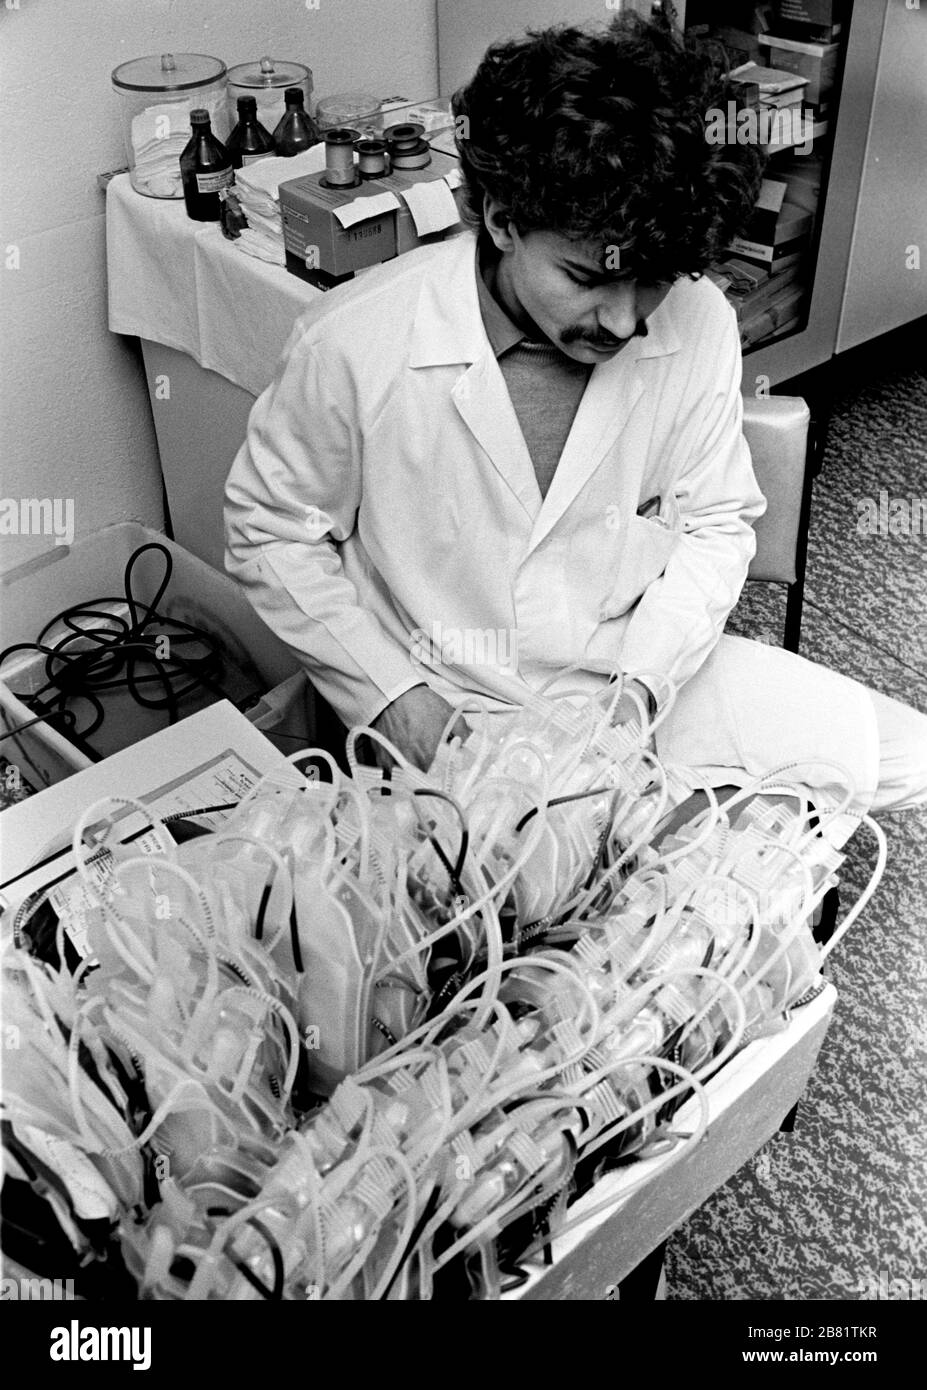 30 November 1984, Saxony, Eilenburg: Blood bags - A blood donation campaign of the Transfusion Service Leipzig takes place in the 1980s in the Eilenburg District Hospital. Exact admission date not known. Photo: Volkmar Heinz/dpa-Zentralbild/ZB Stock Photo